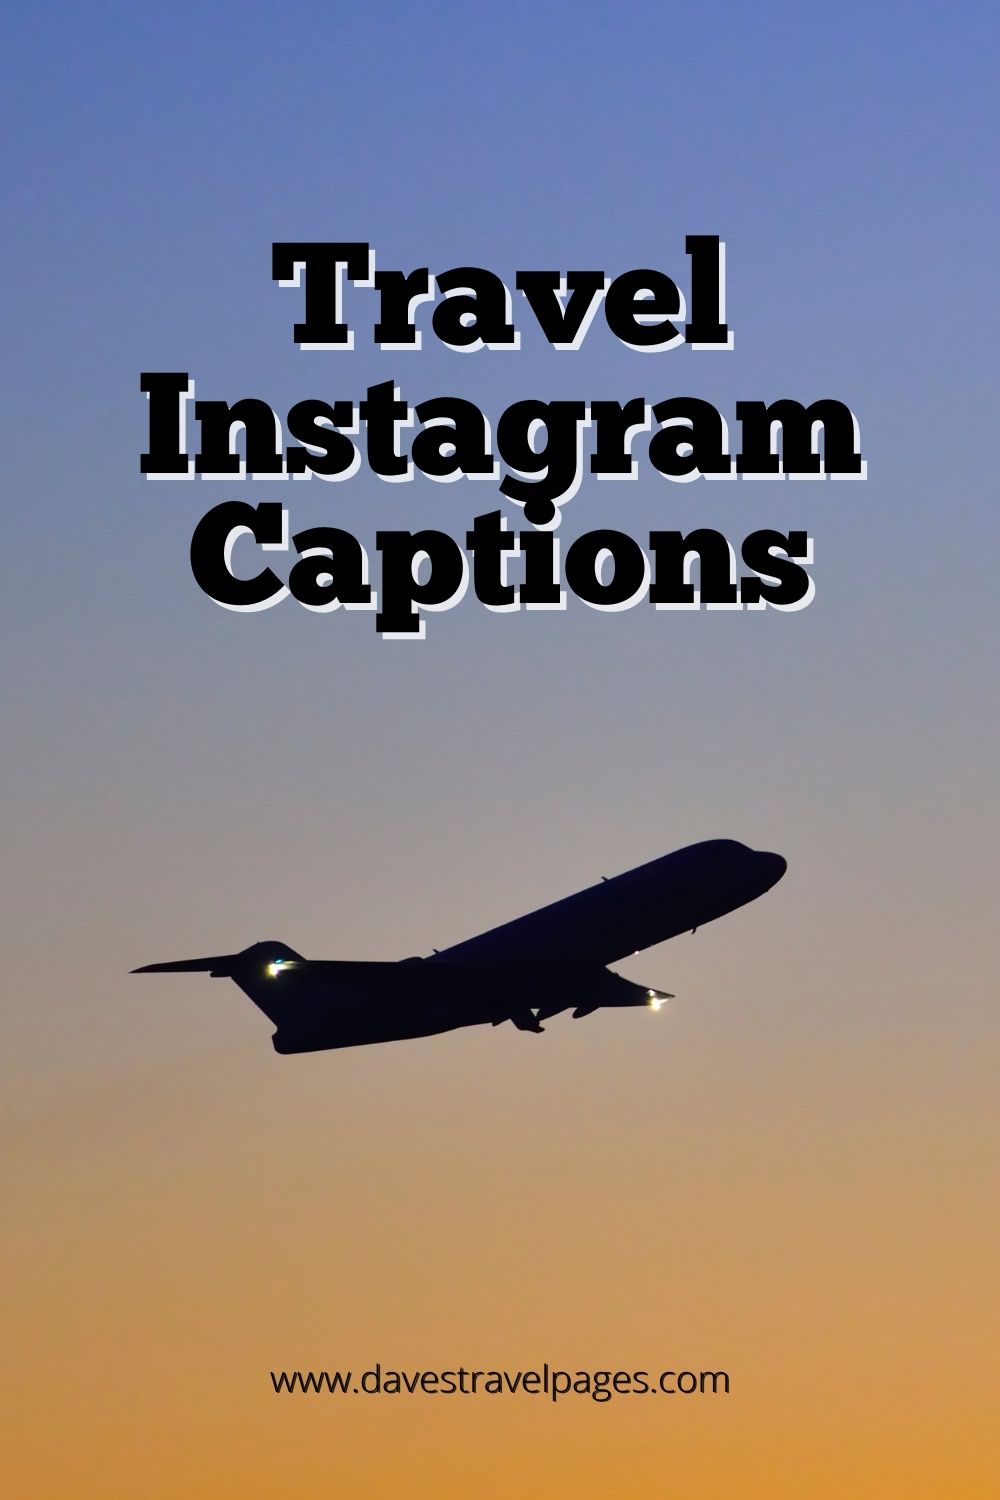 Instagram Captions About Travel